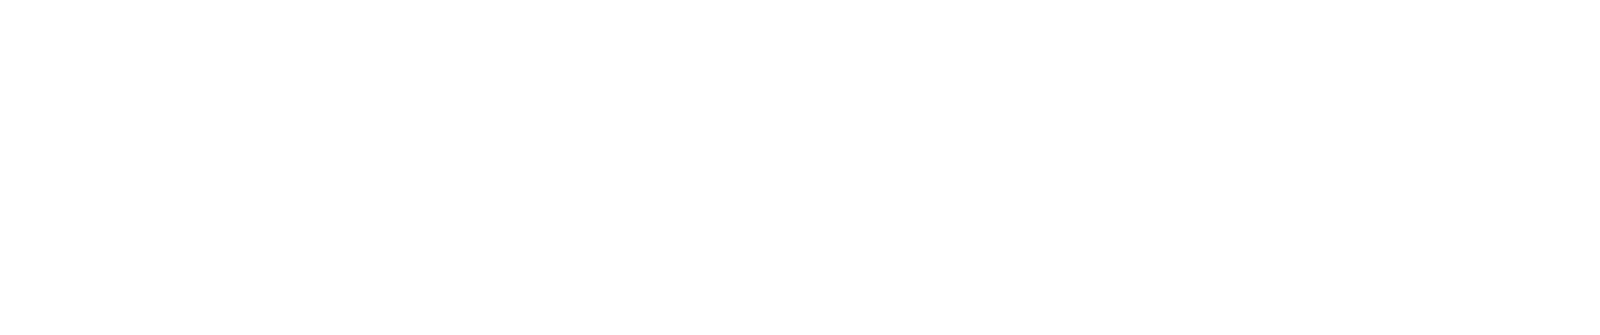 2015 Rise Directed By Joe Jaeger and Mike Reed